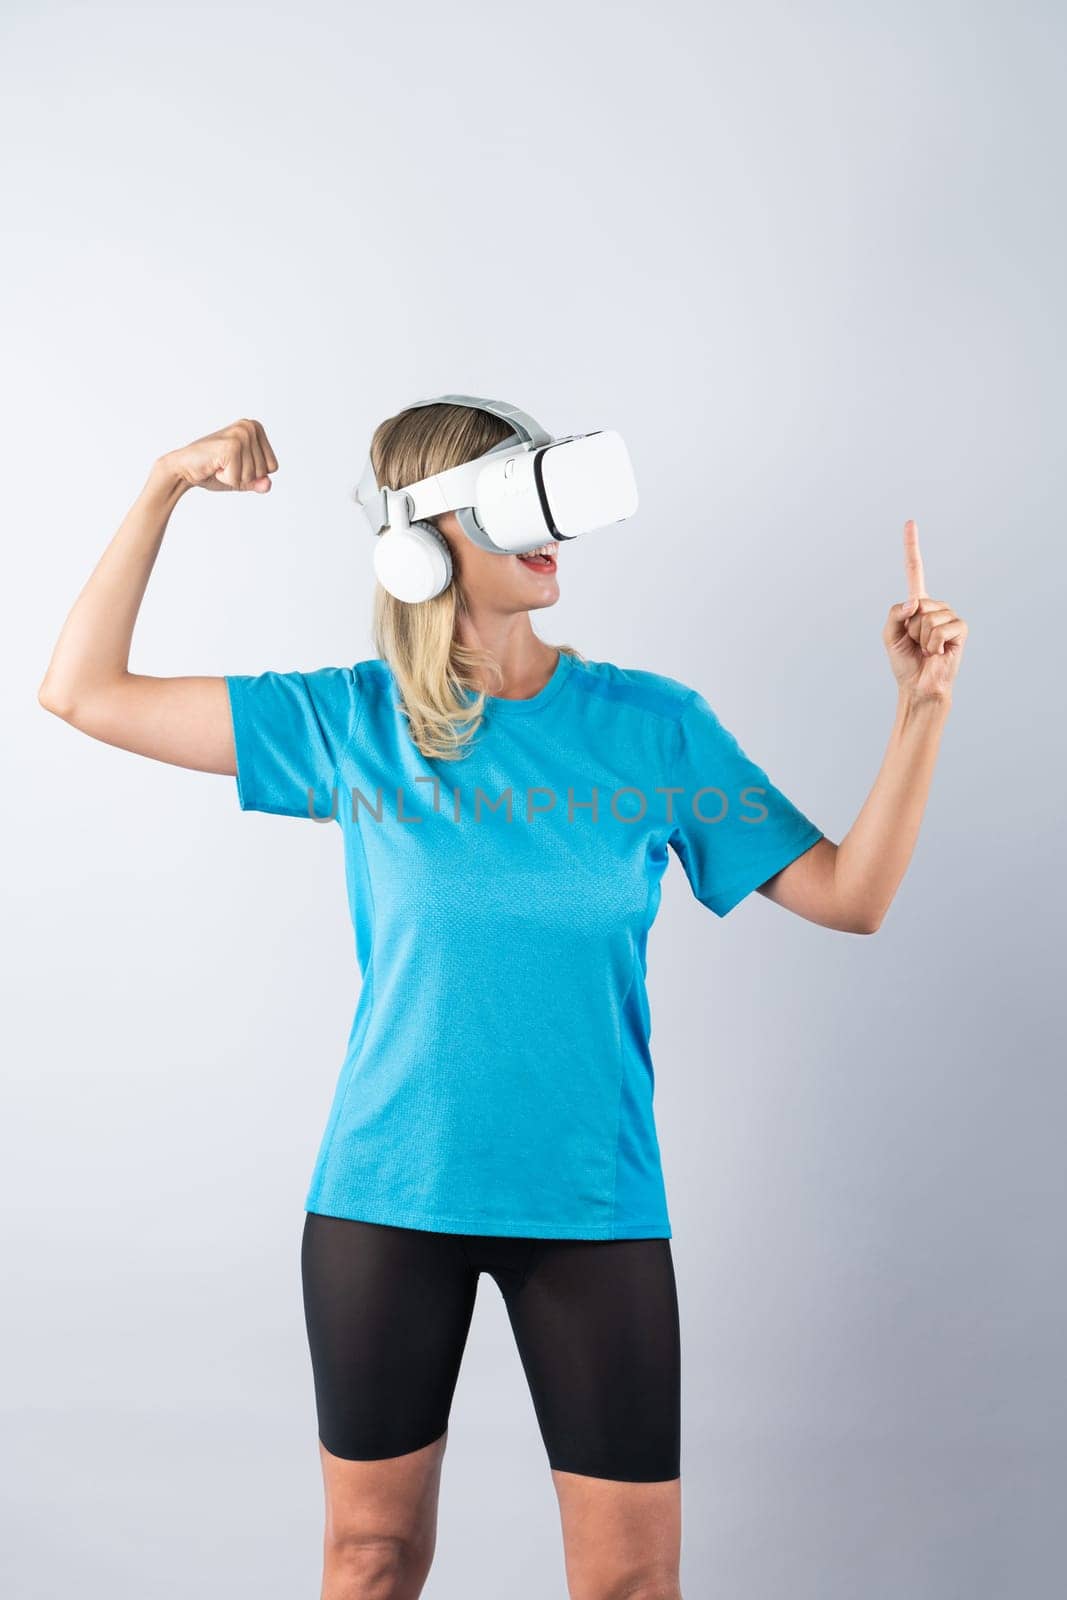 Girl pointing or spinning basketball while using VR glasses. Caucasian woman flexing while wearing casual shirt and visual reality goggles and standing at pink background. Innovation. Contraption.